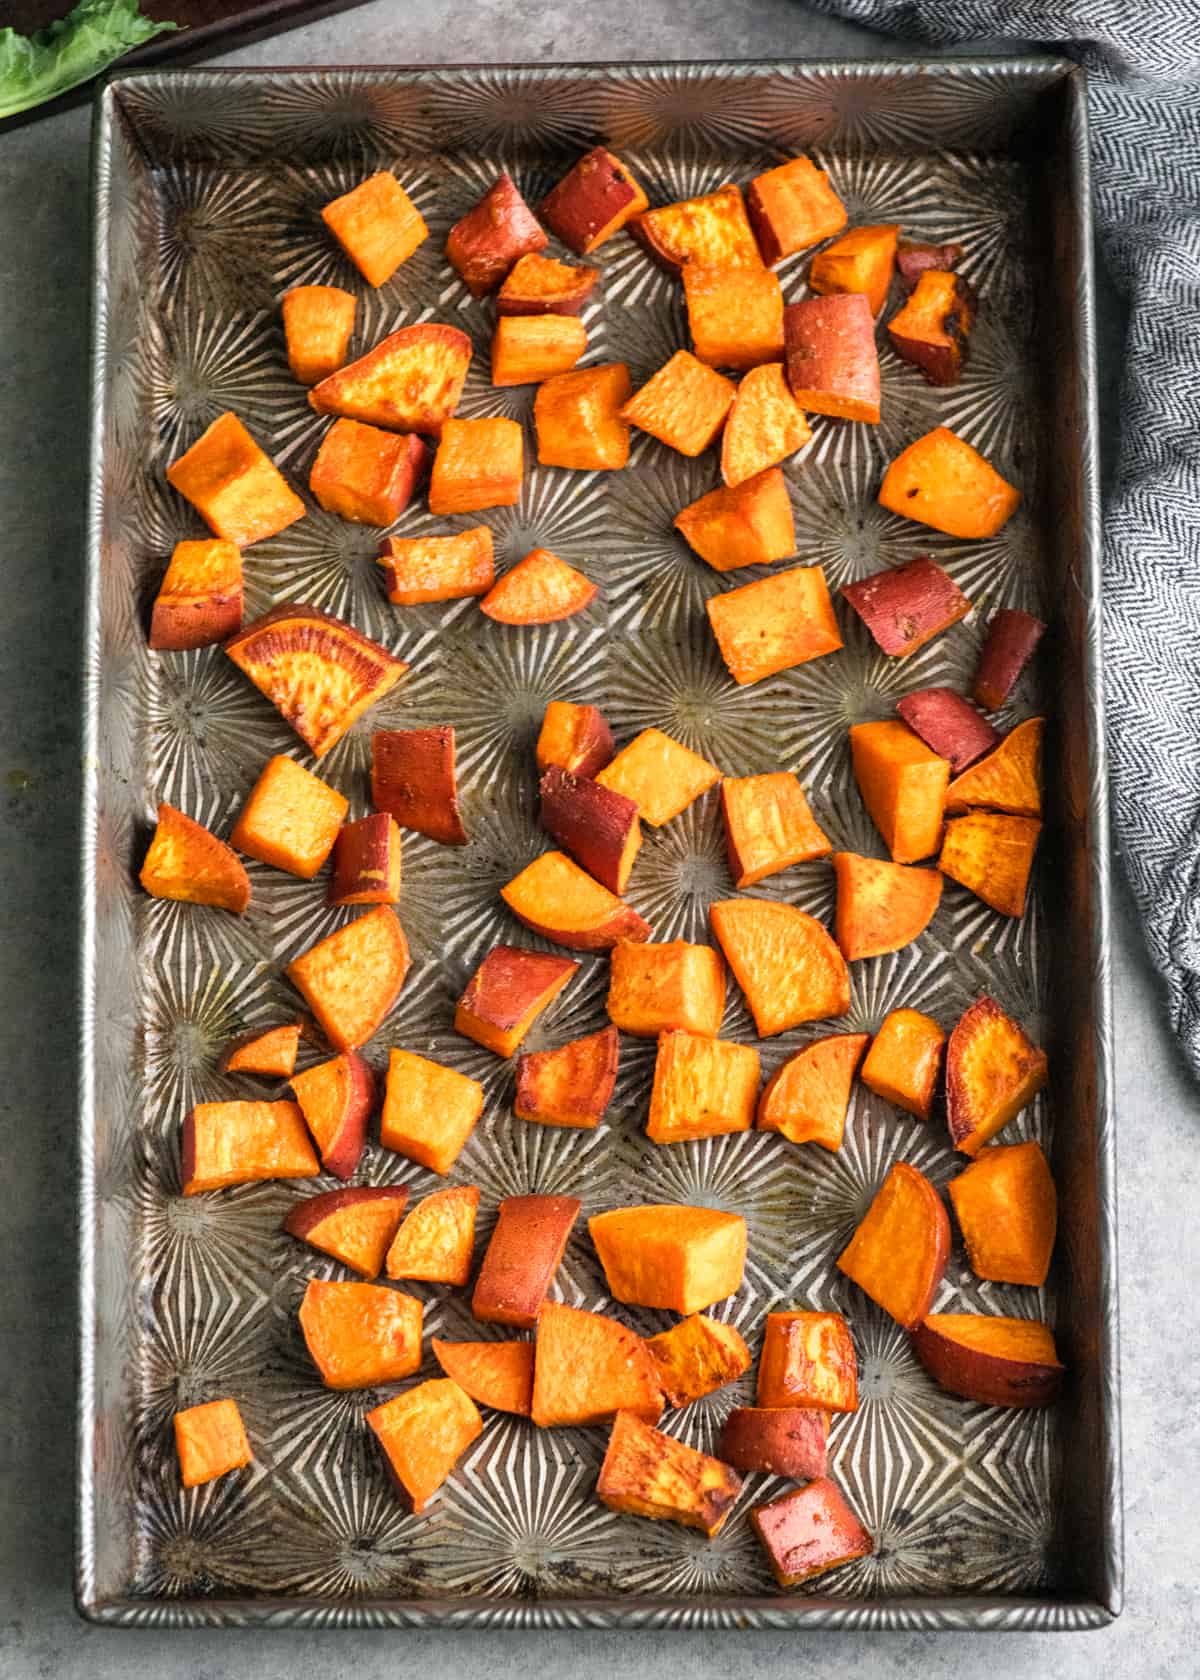 Overhead view of slightly roasted sweet potatoes in the baking pan. 